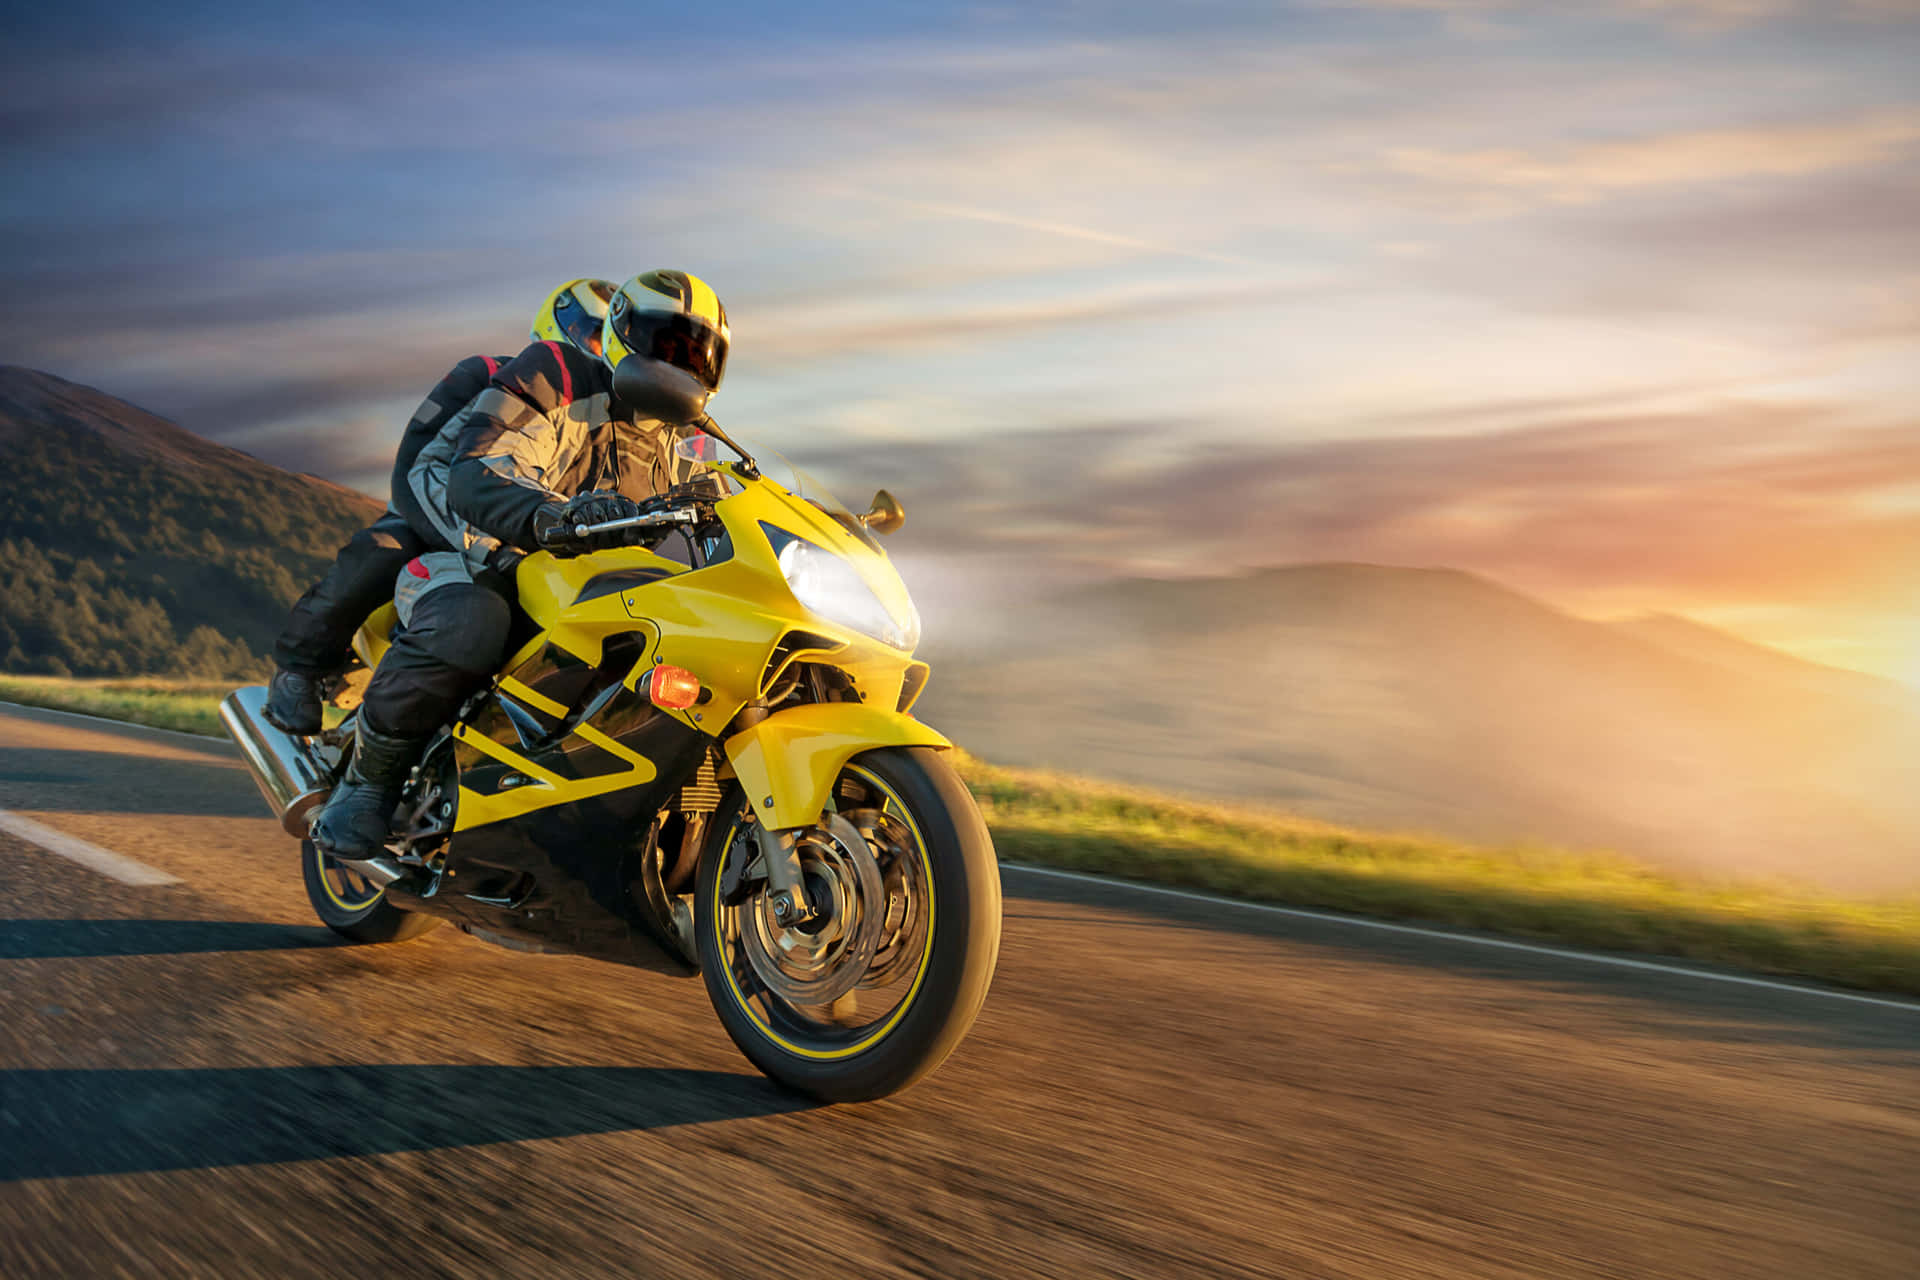 A Man Riding A Yellow Motorcycle On A Road At Sunset